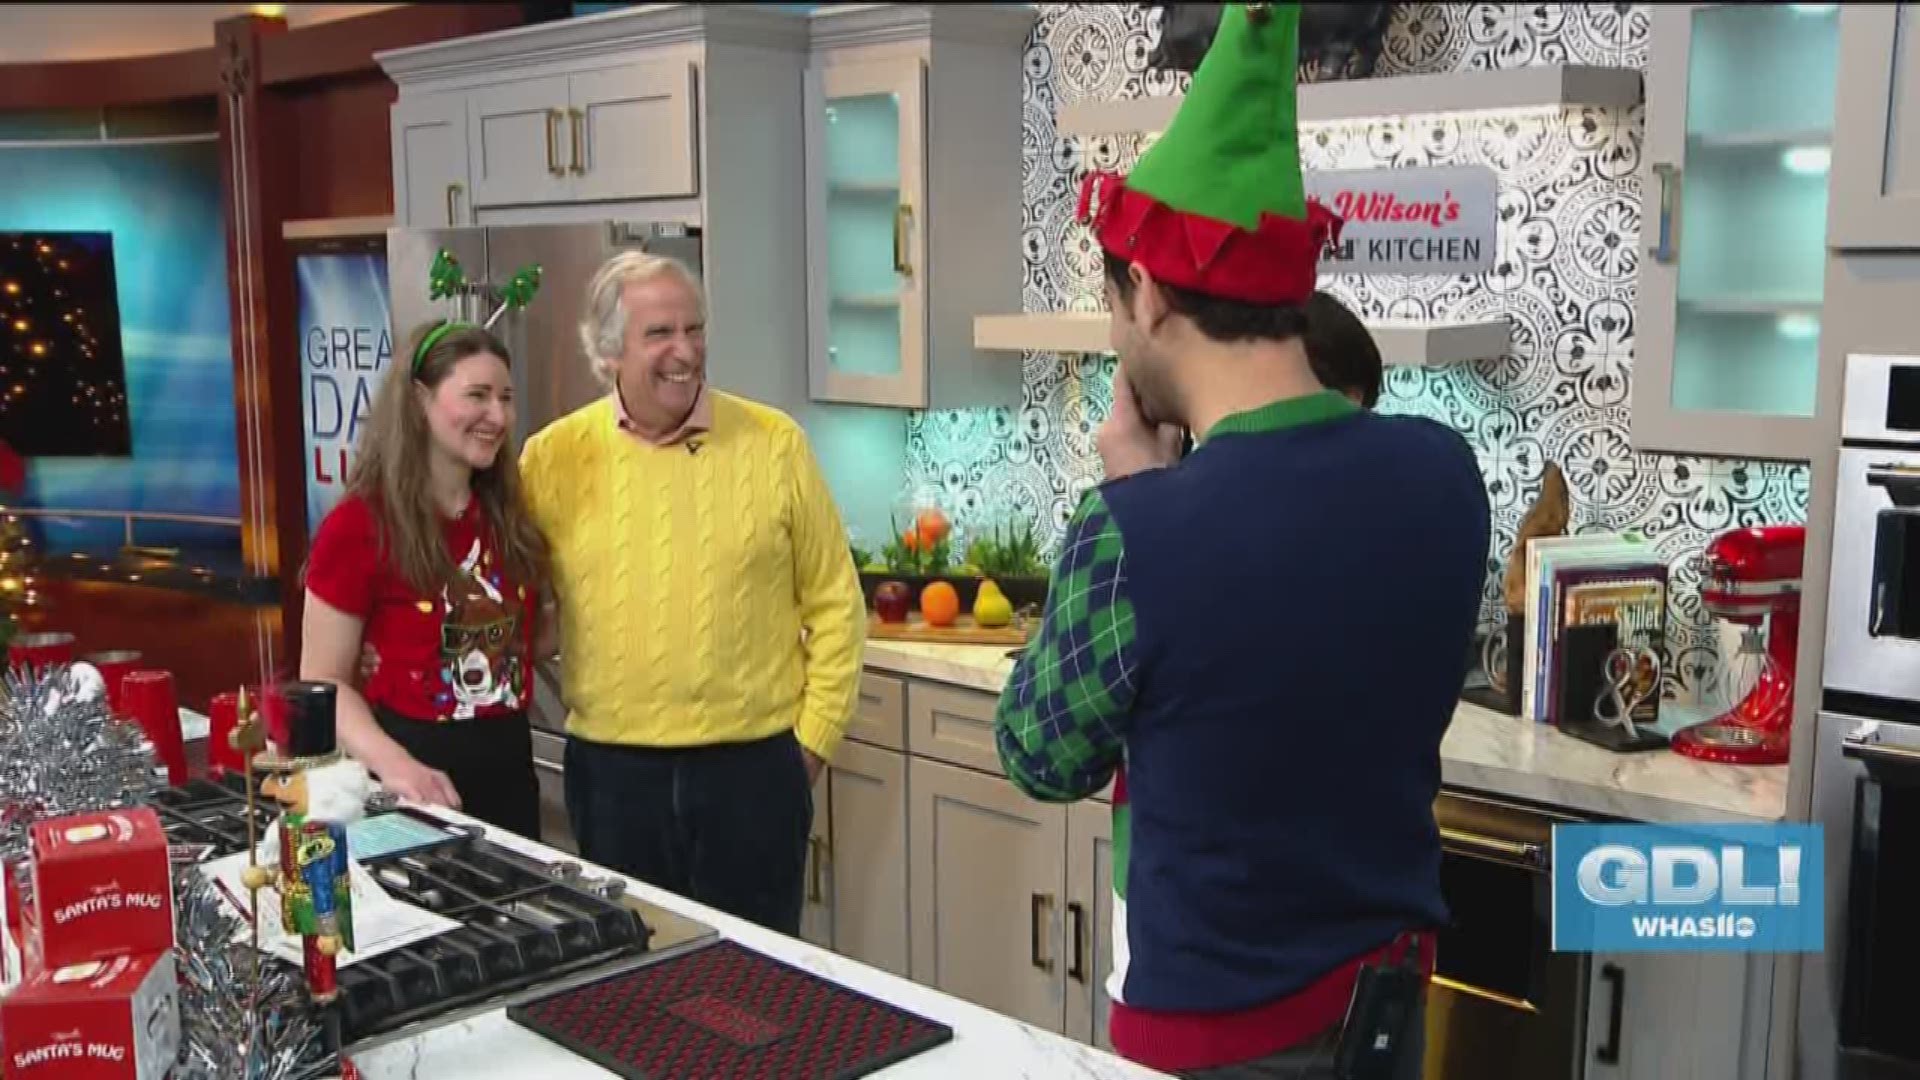 The Miracle Holiday Pop-Up Bar is open through Christmas Eve at Galaxie Bar, which is located at 732 East Market Street in Louisville, KY. Henry Winkler decided to pop in during the segment.